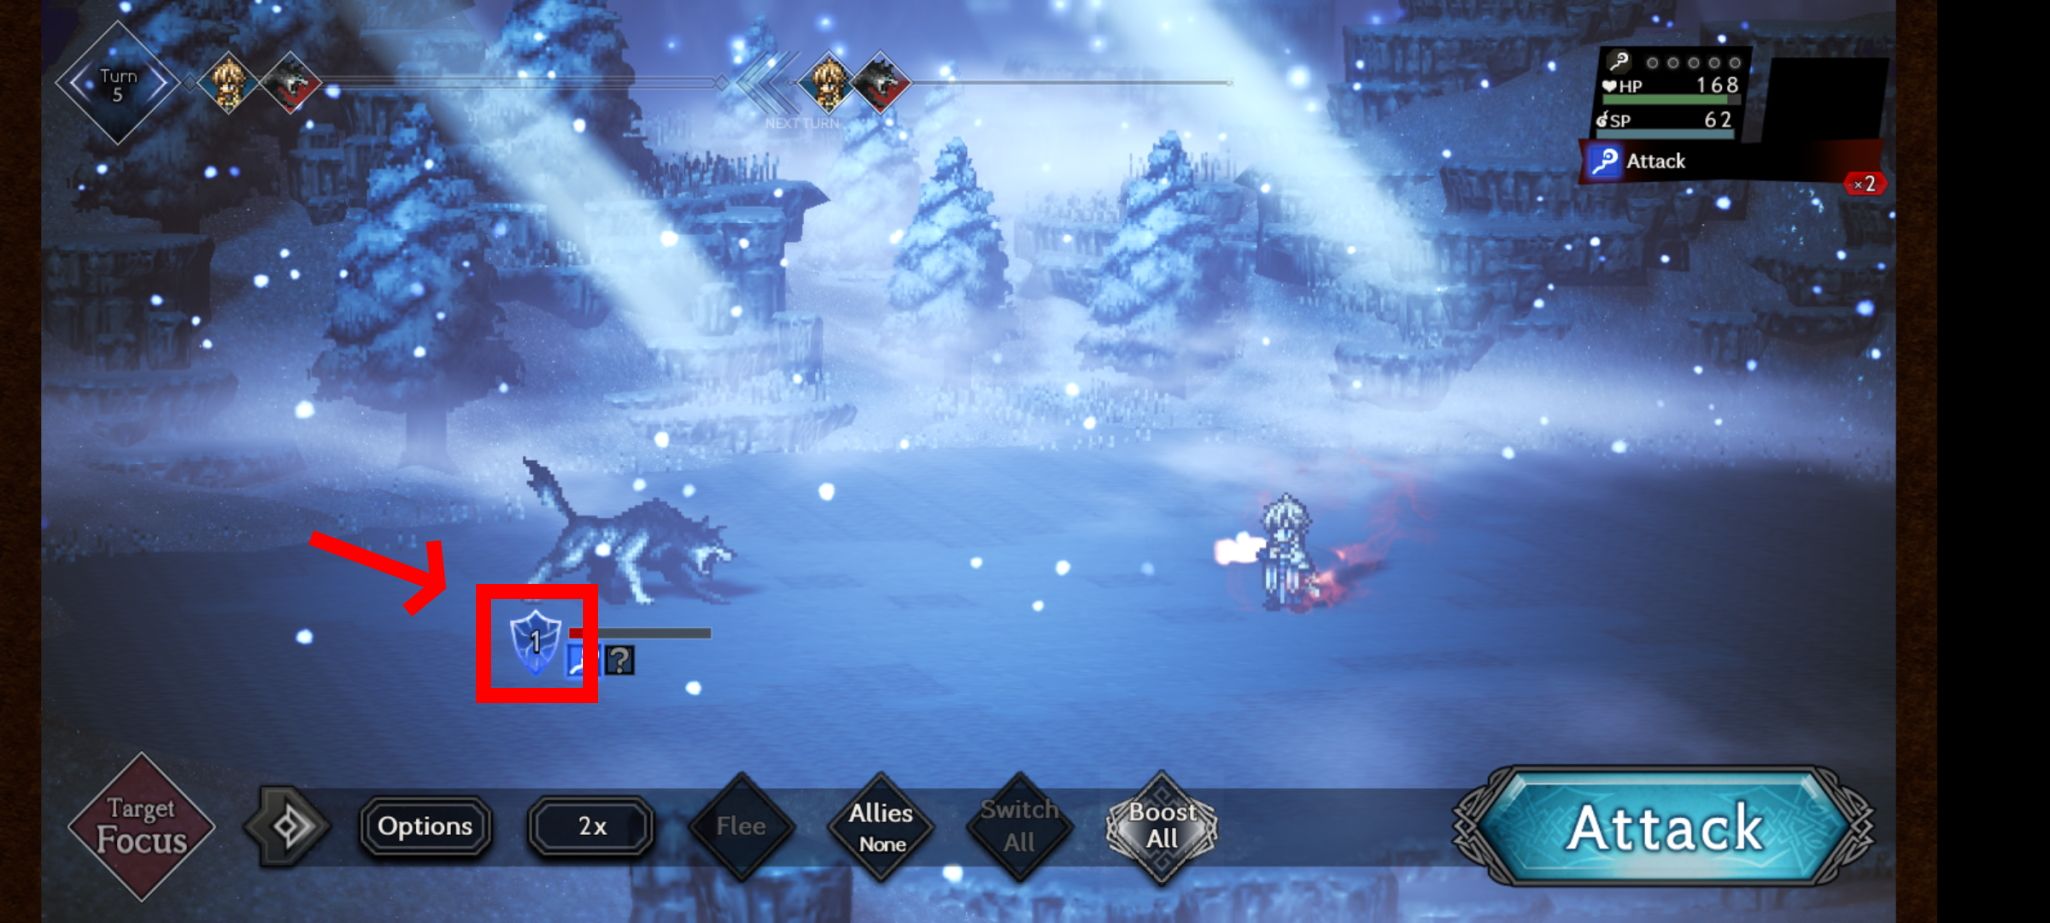 Octopath Traveler: Champions of the Continent break indication